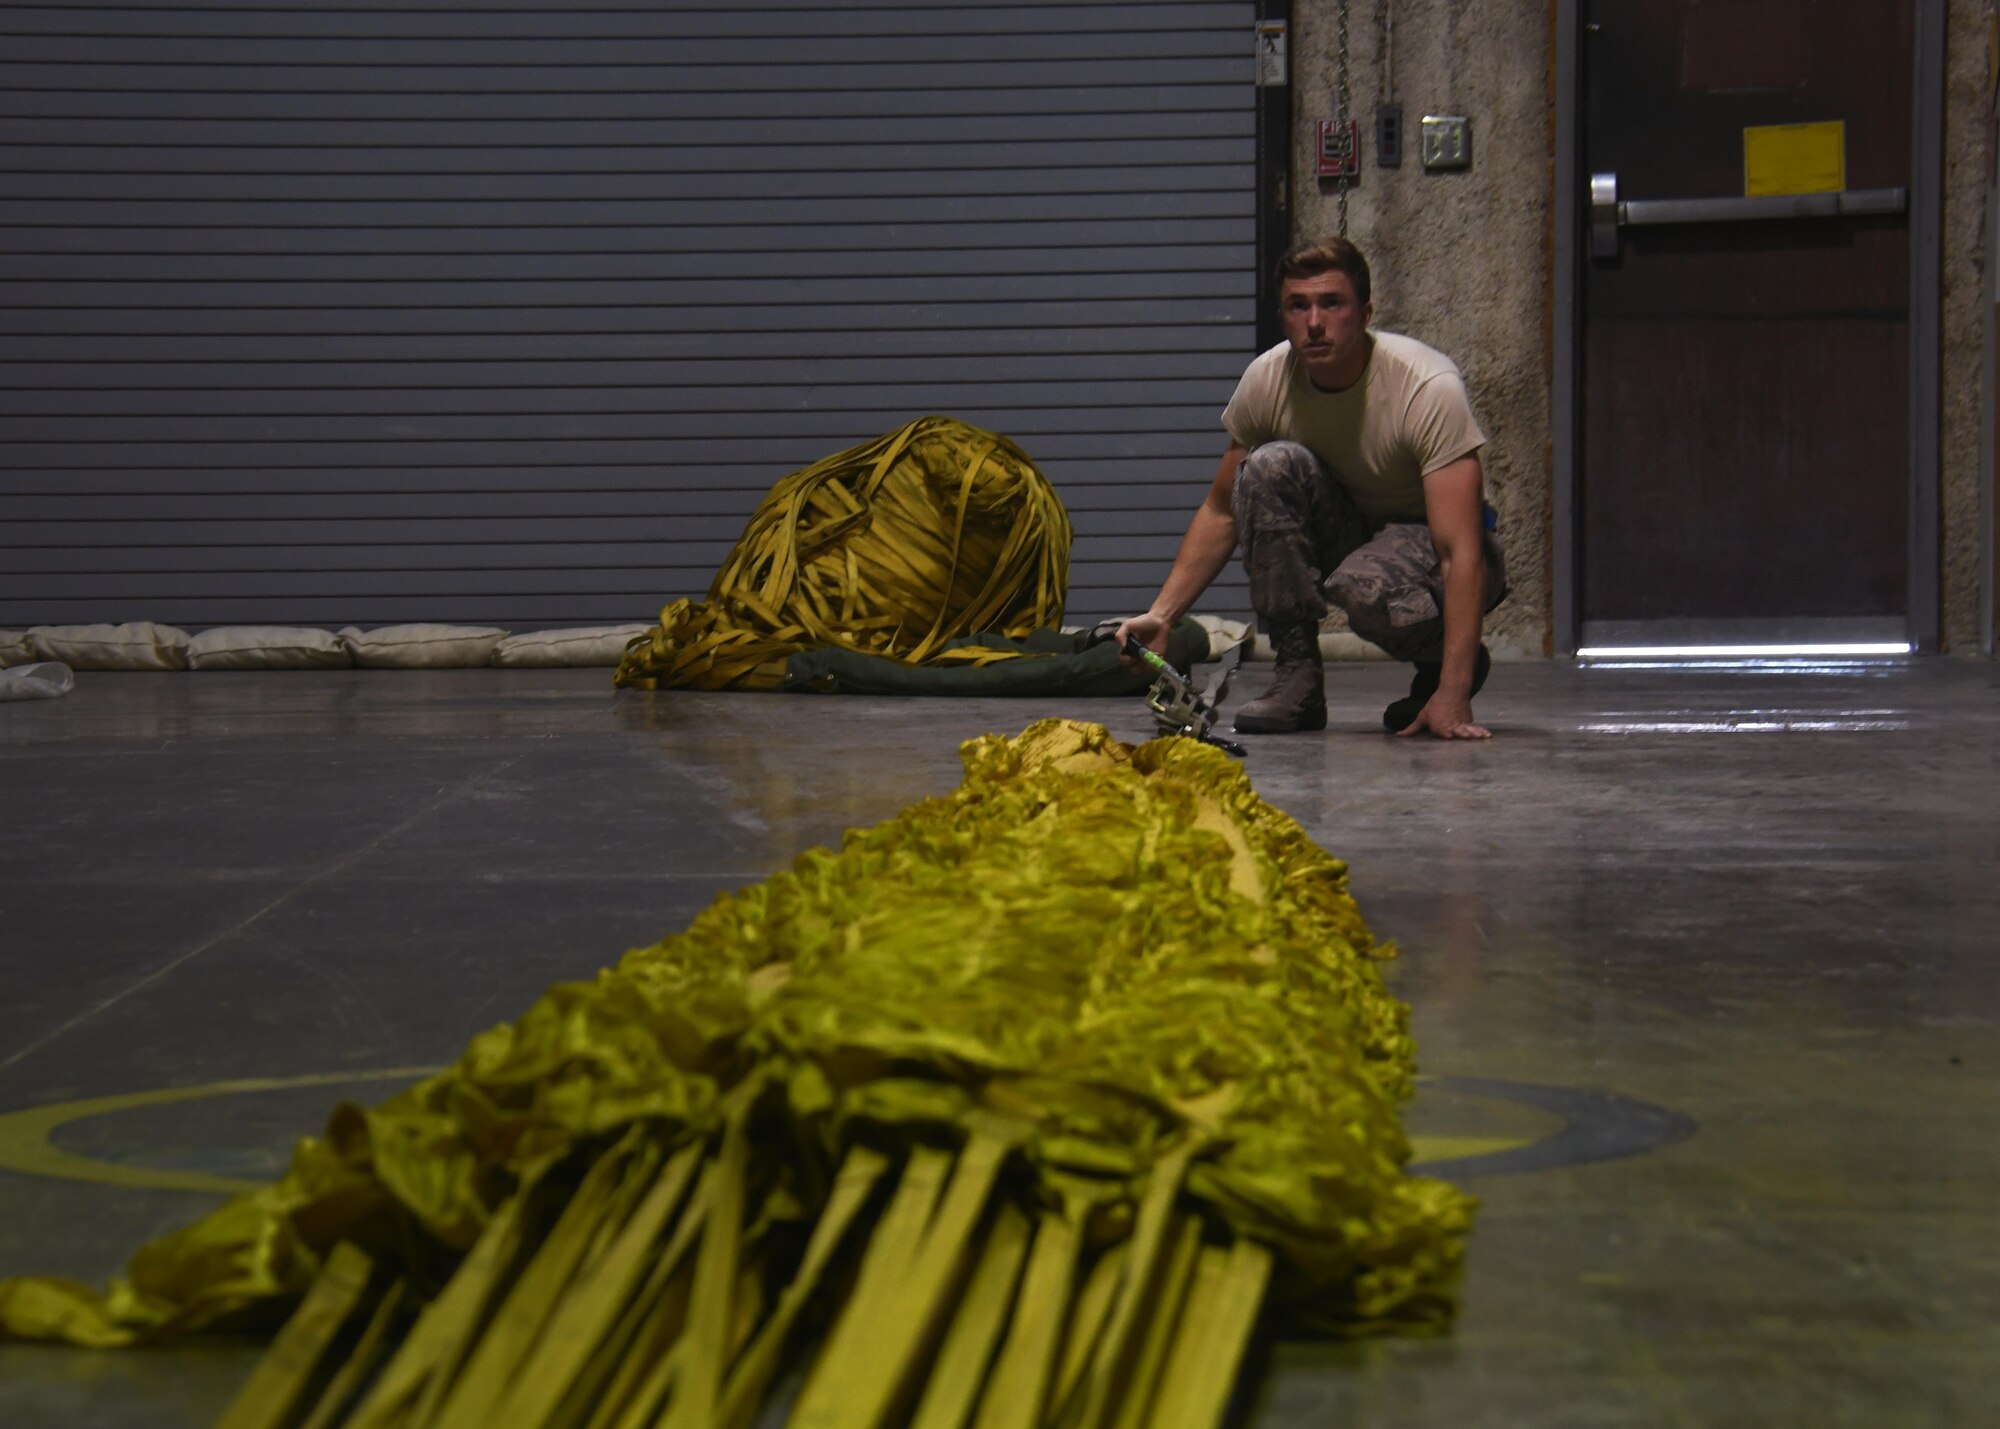 U.S. Airman 1st Class Eric Hornbeck, 379th Expeditionary Operations Support Squadron aircrew flight equipment technician, applies tension to a drag parachute so he can fold it at Al Udeid Air Base, Qatar, Nov. 30, 2016. These drag parachutes are used to help aircraft slow down after landing, and put less strain on the break systems. (U.S. Air Force photo by Senior Airman Miles Wilson)